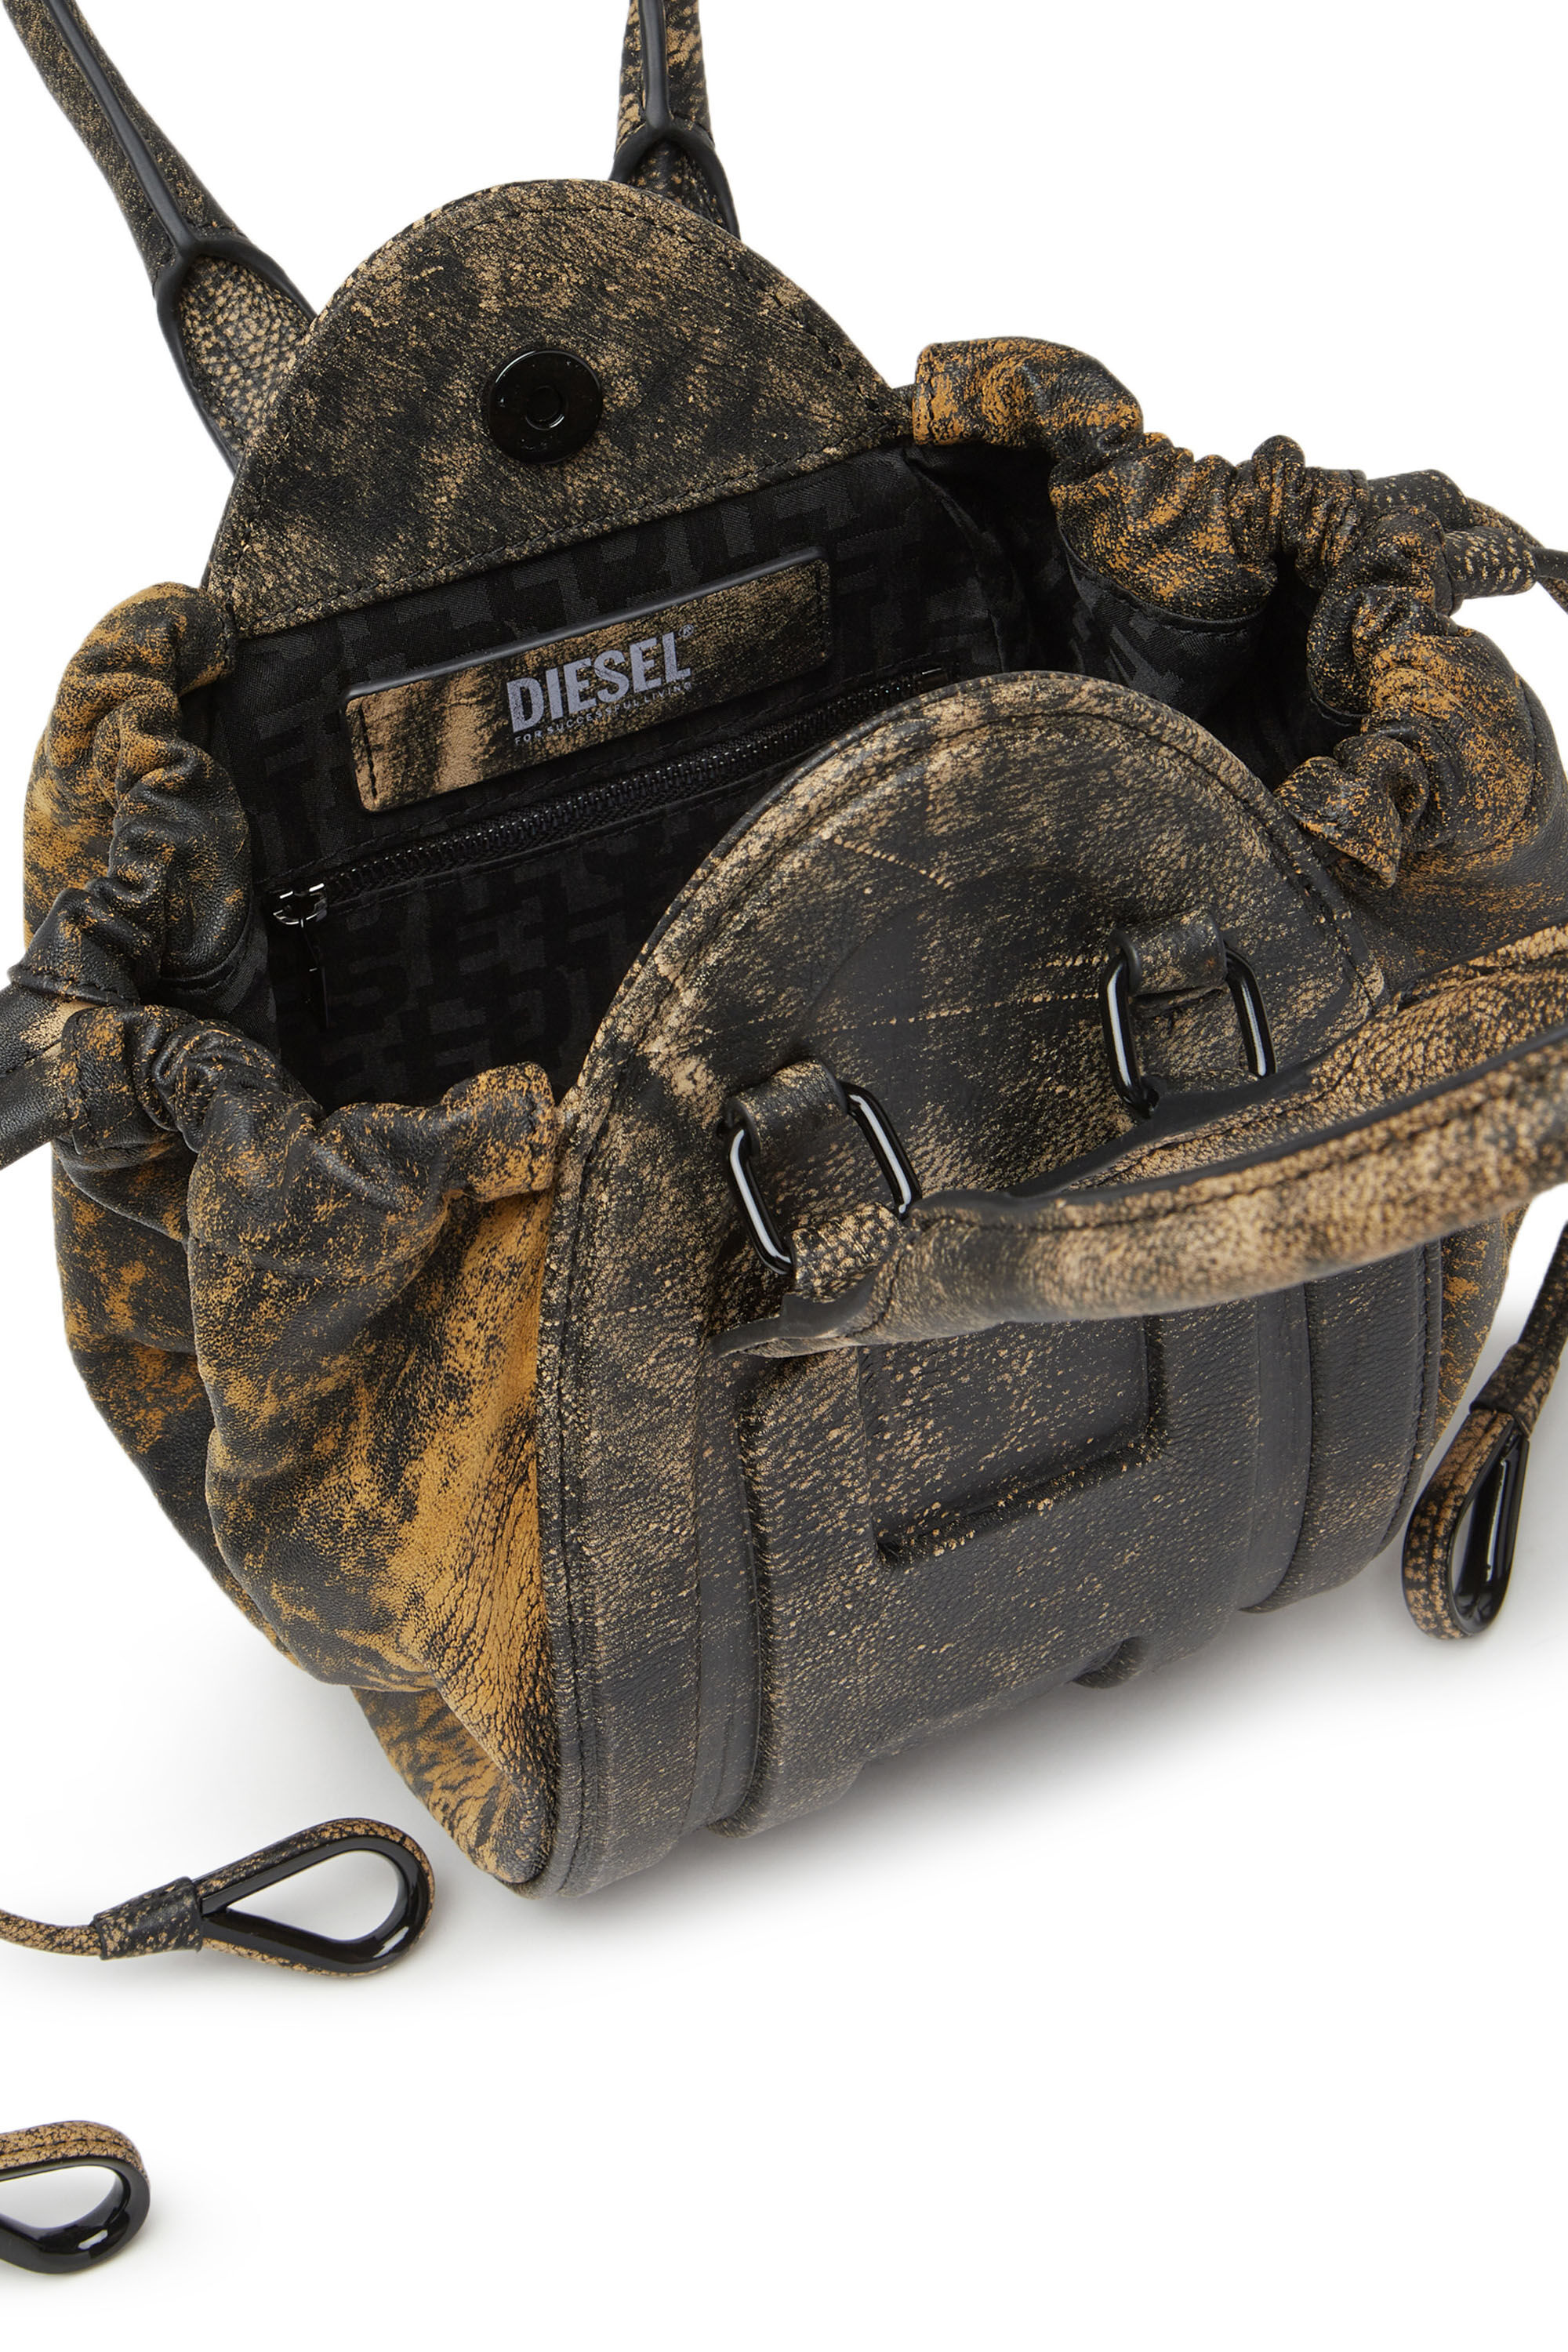 1DR-FOLD XS Woman: Oval logo handbag in marbled leather | Diesel